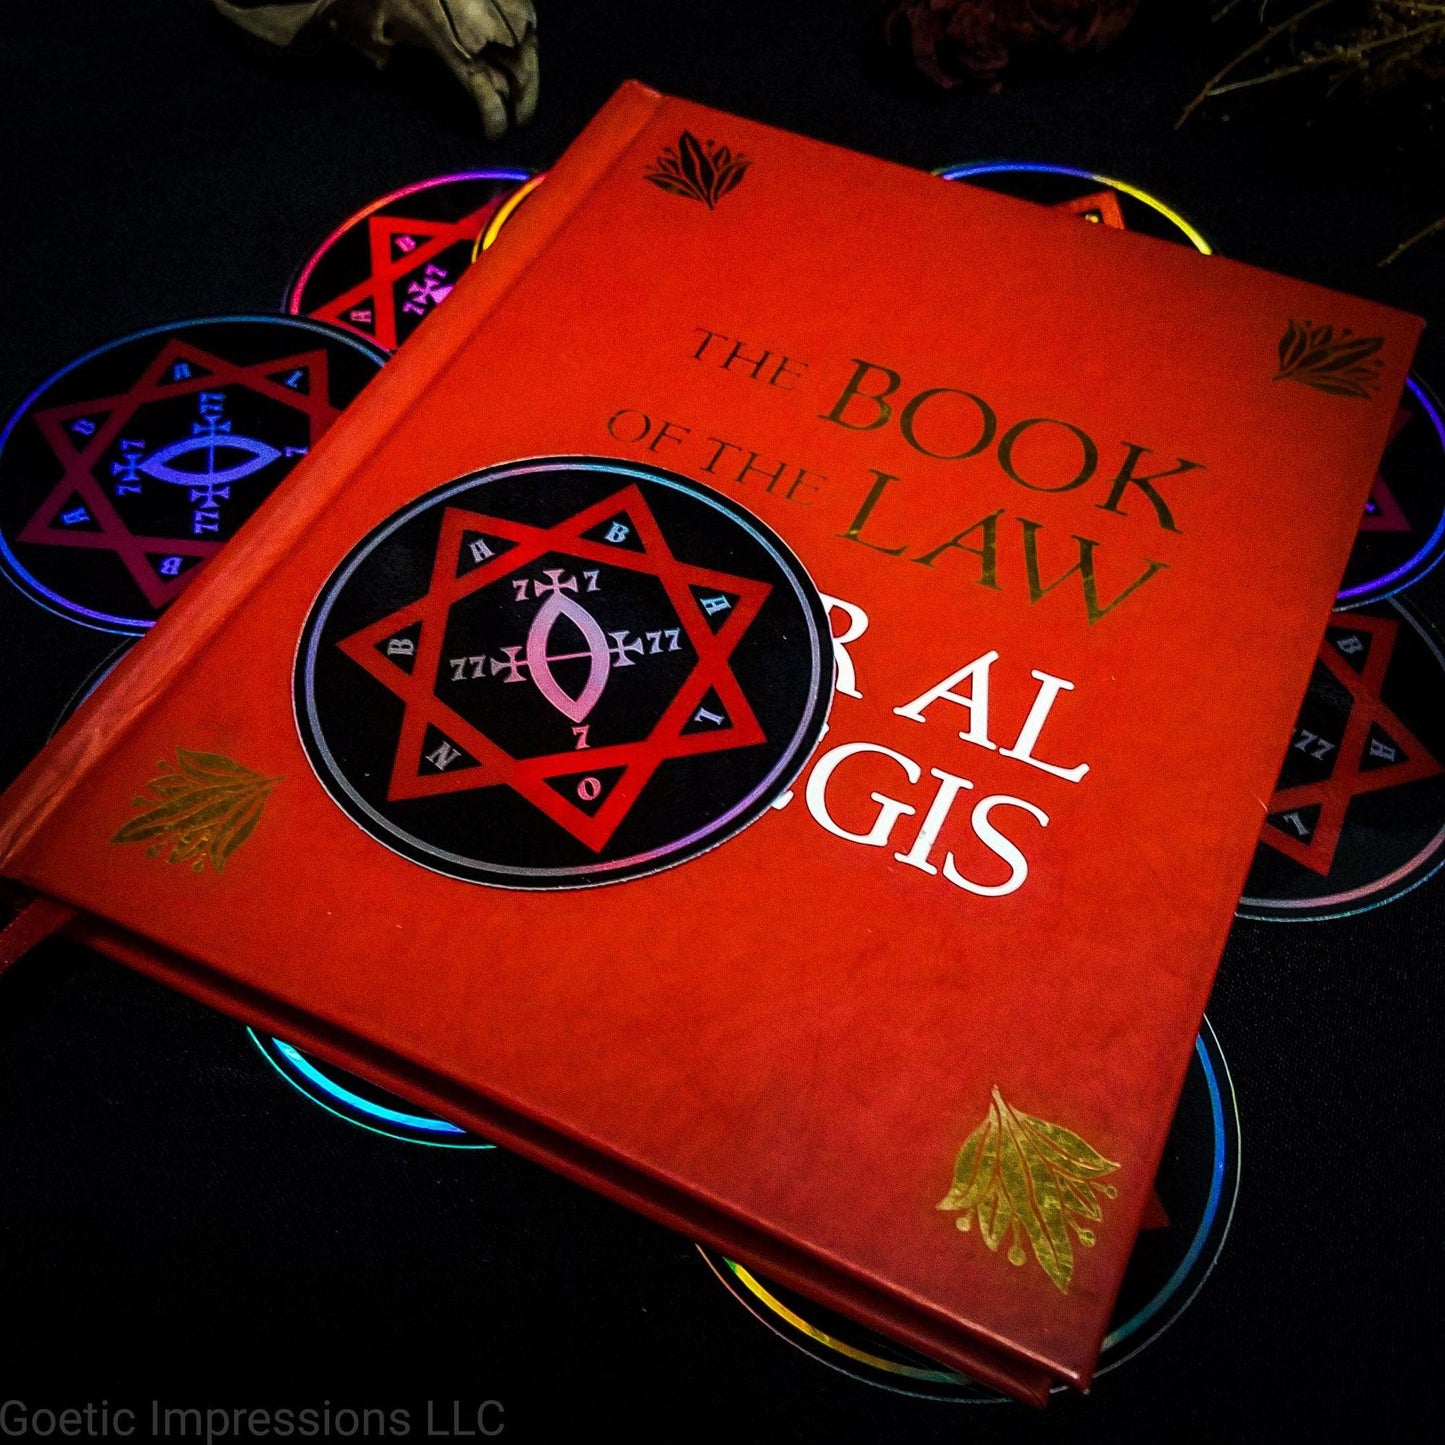 A three inch holographic sticker with a black background and a white and red symbol of a Star of Babalon rests on top of a red book titled Book of the Law, Liber Al Vel Legis. The book is placed on a pile of the stickers. The holographic paper shines in a wide arrange of rainbow colors when the light catches it at different angles.